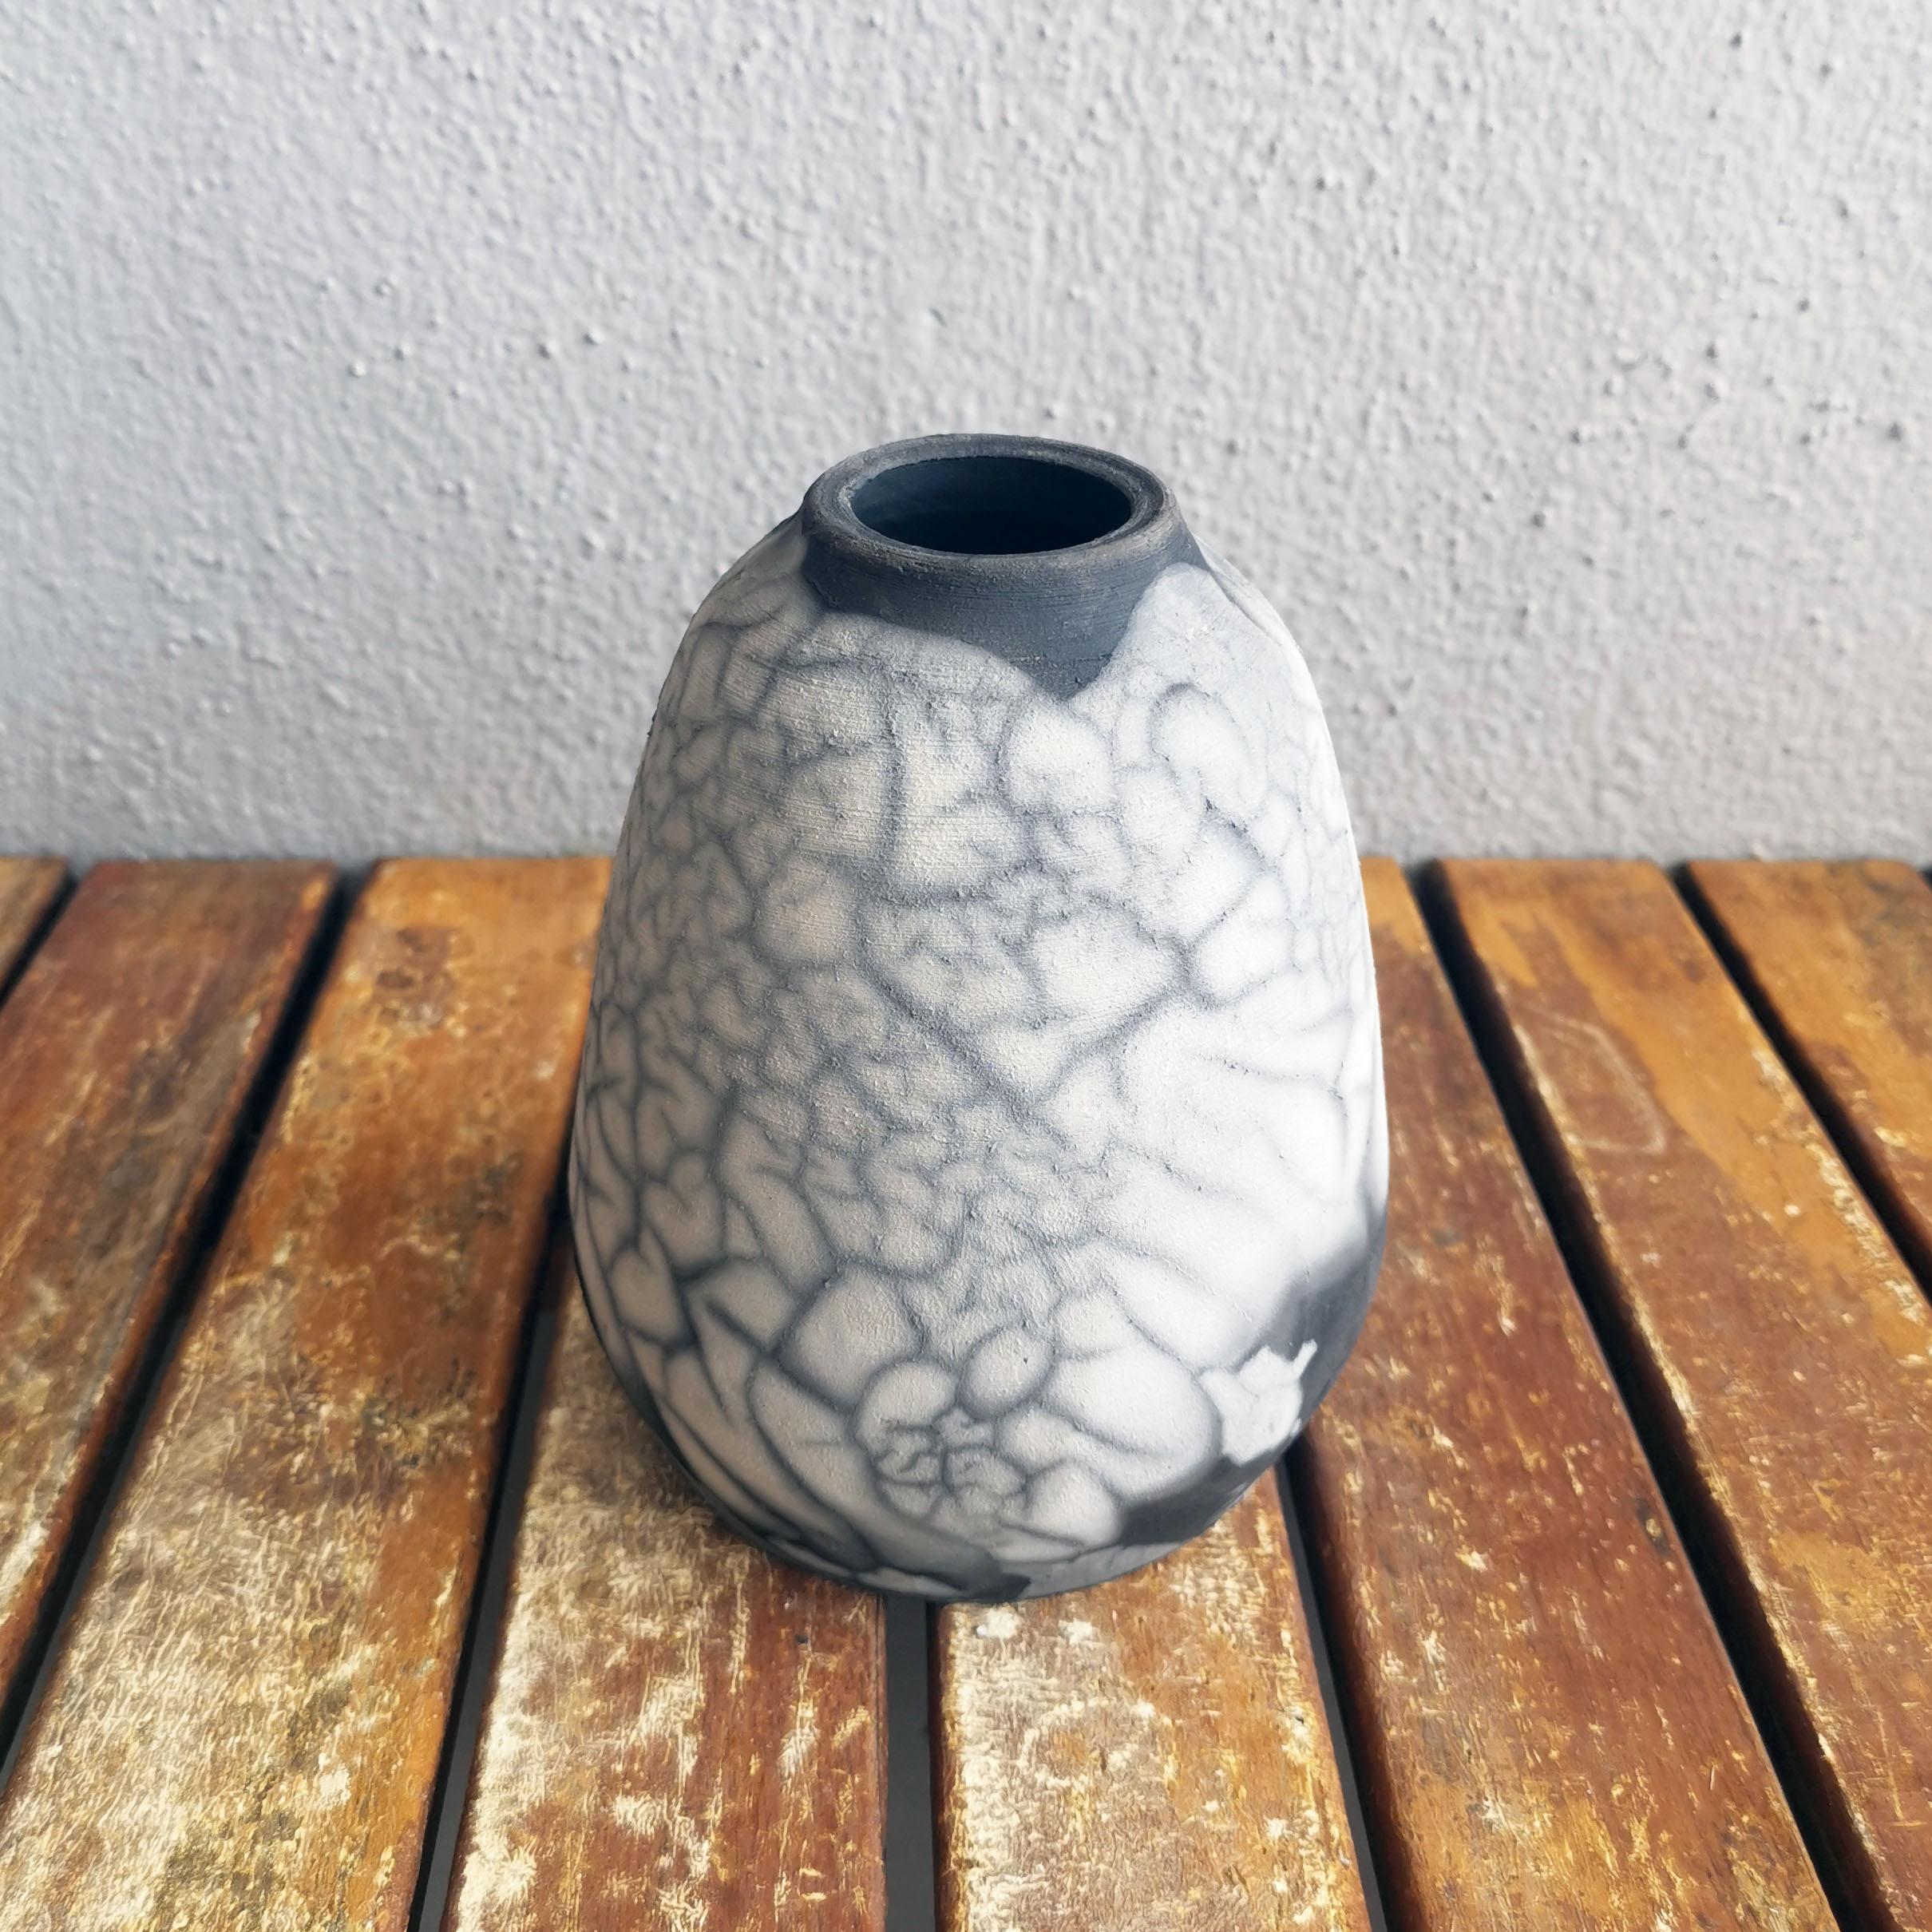 Suzu (鈴) ~ (n) bell

Our Suzu vase is named after its shape resembling a bell. With a wide base and a narrow mouth, this vase will be a great addition to a modern-style interior space or as part of a set of similar-sized vases.

Material: Clay,